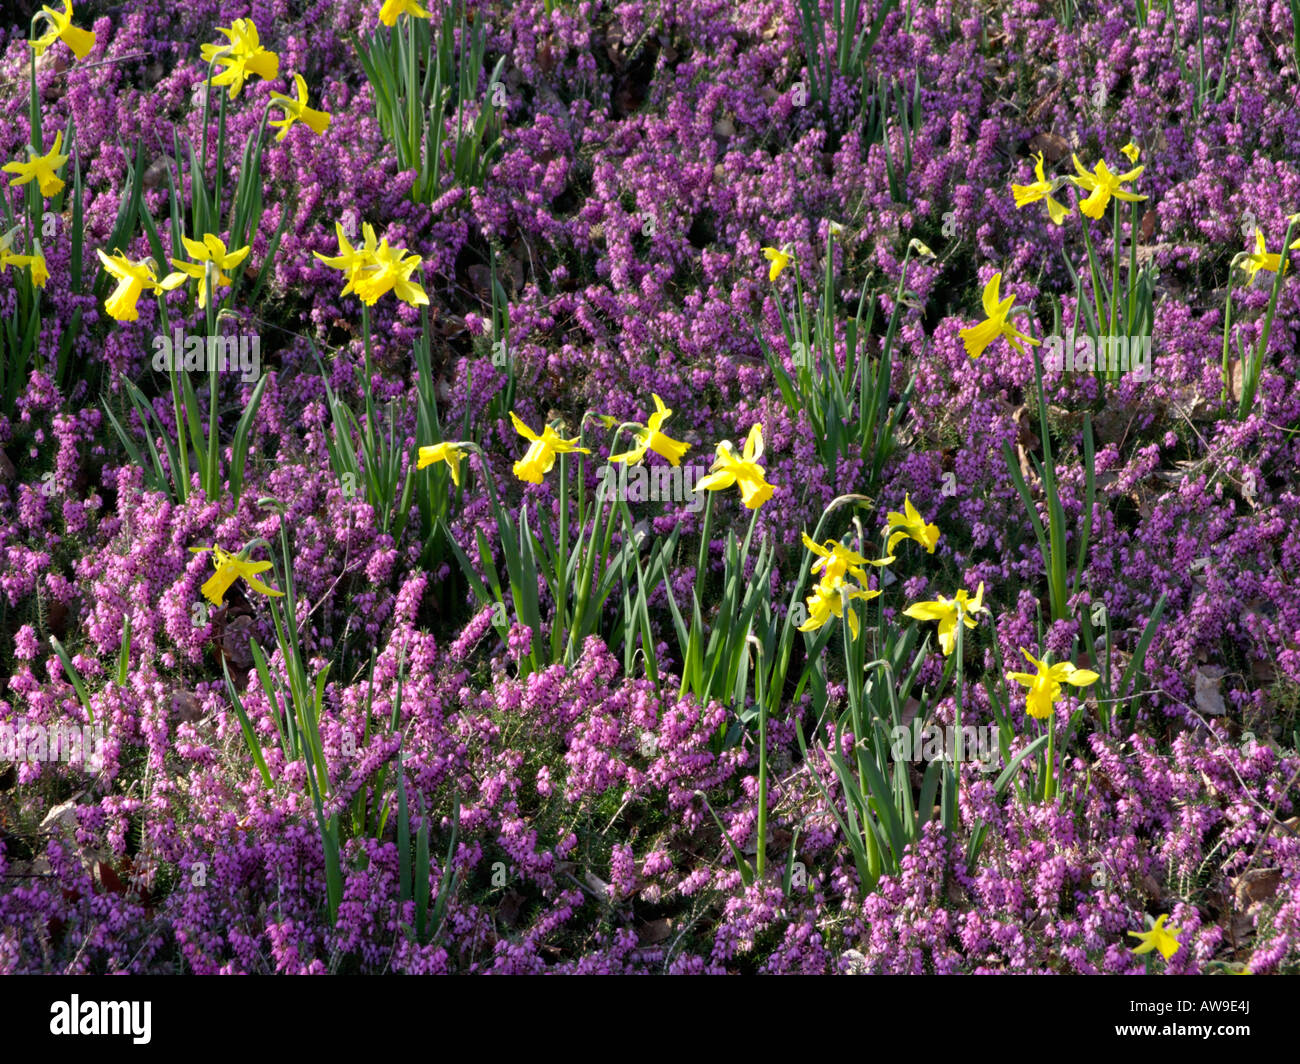 Daffodils (Narcissus) and winter heather (Erica carnea syn. Erica herbacea) Stock Photo